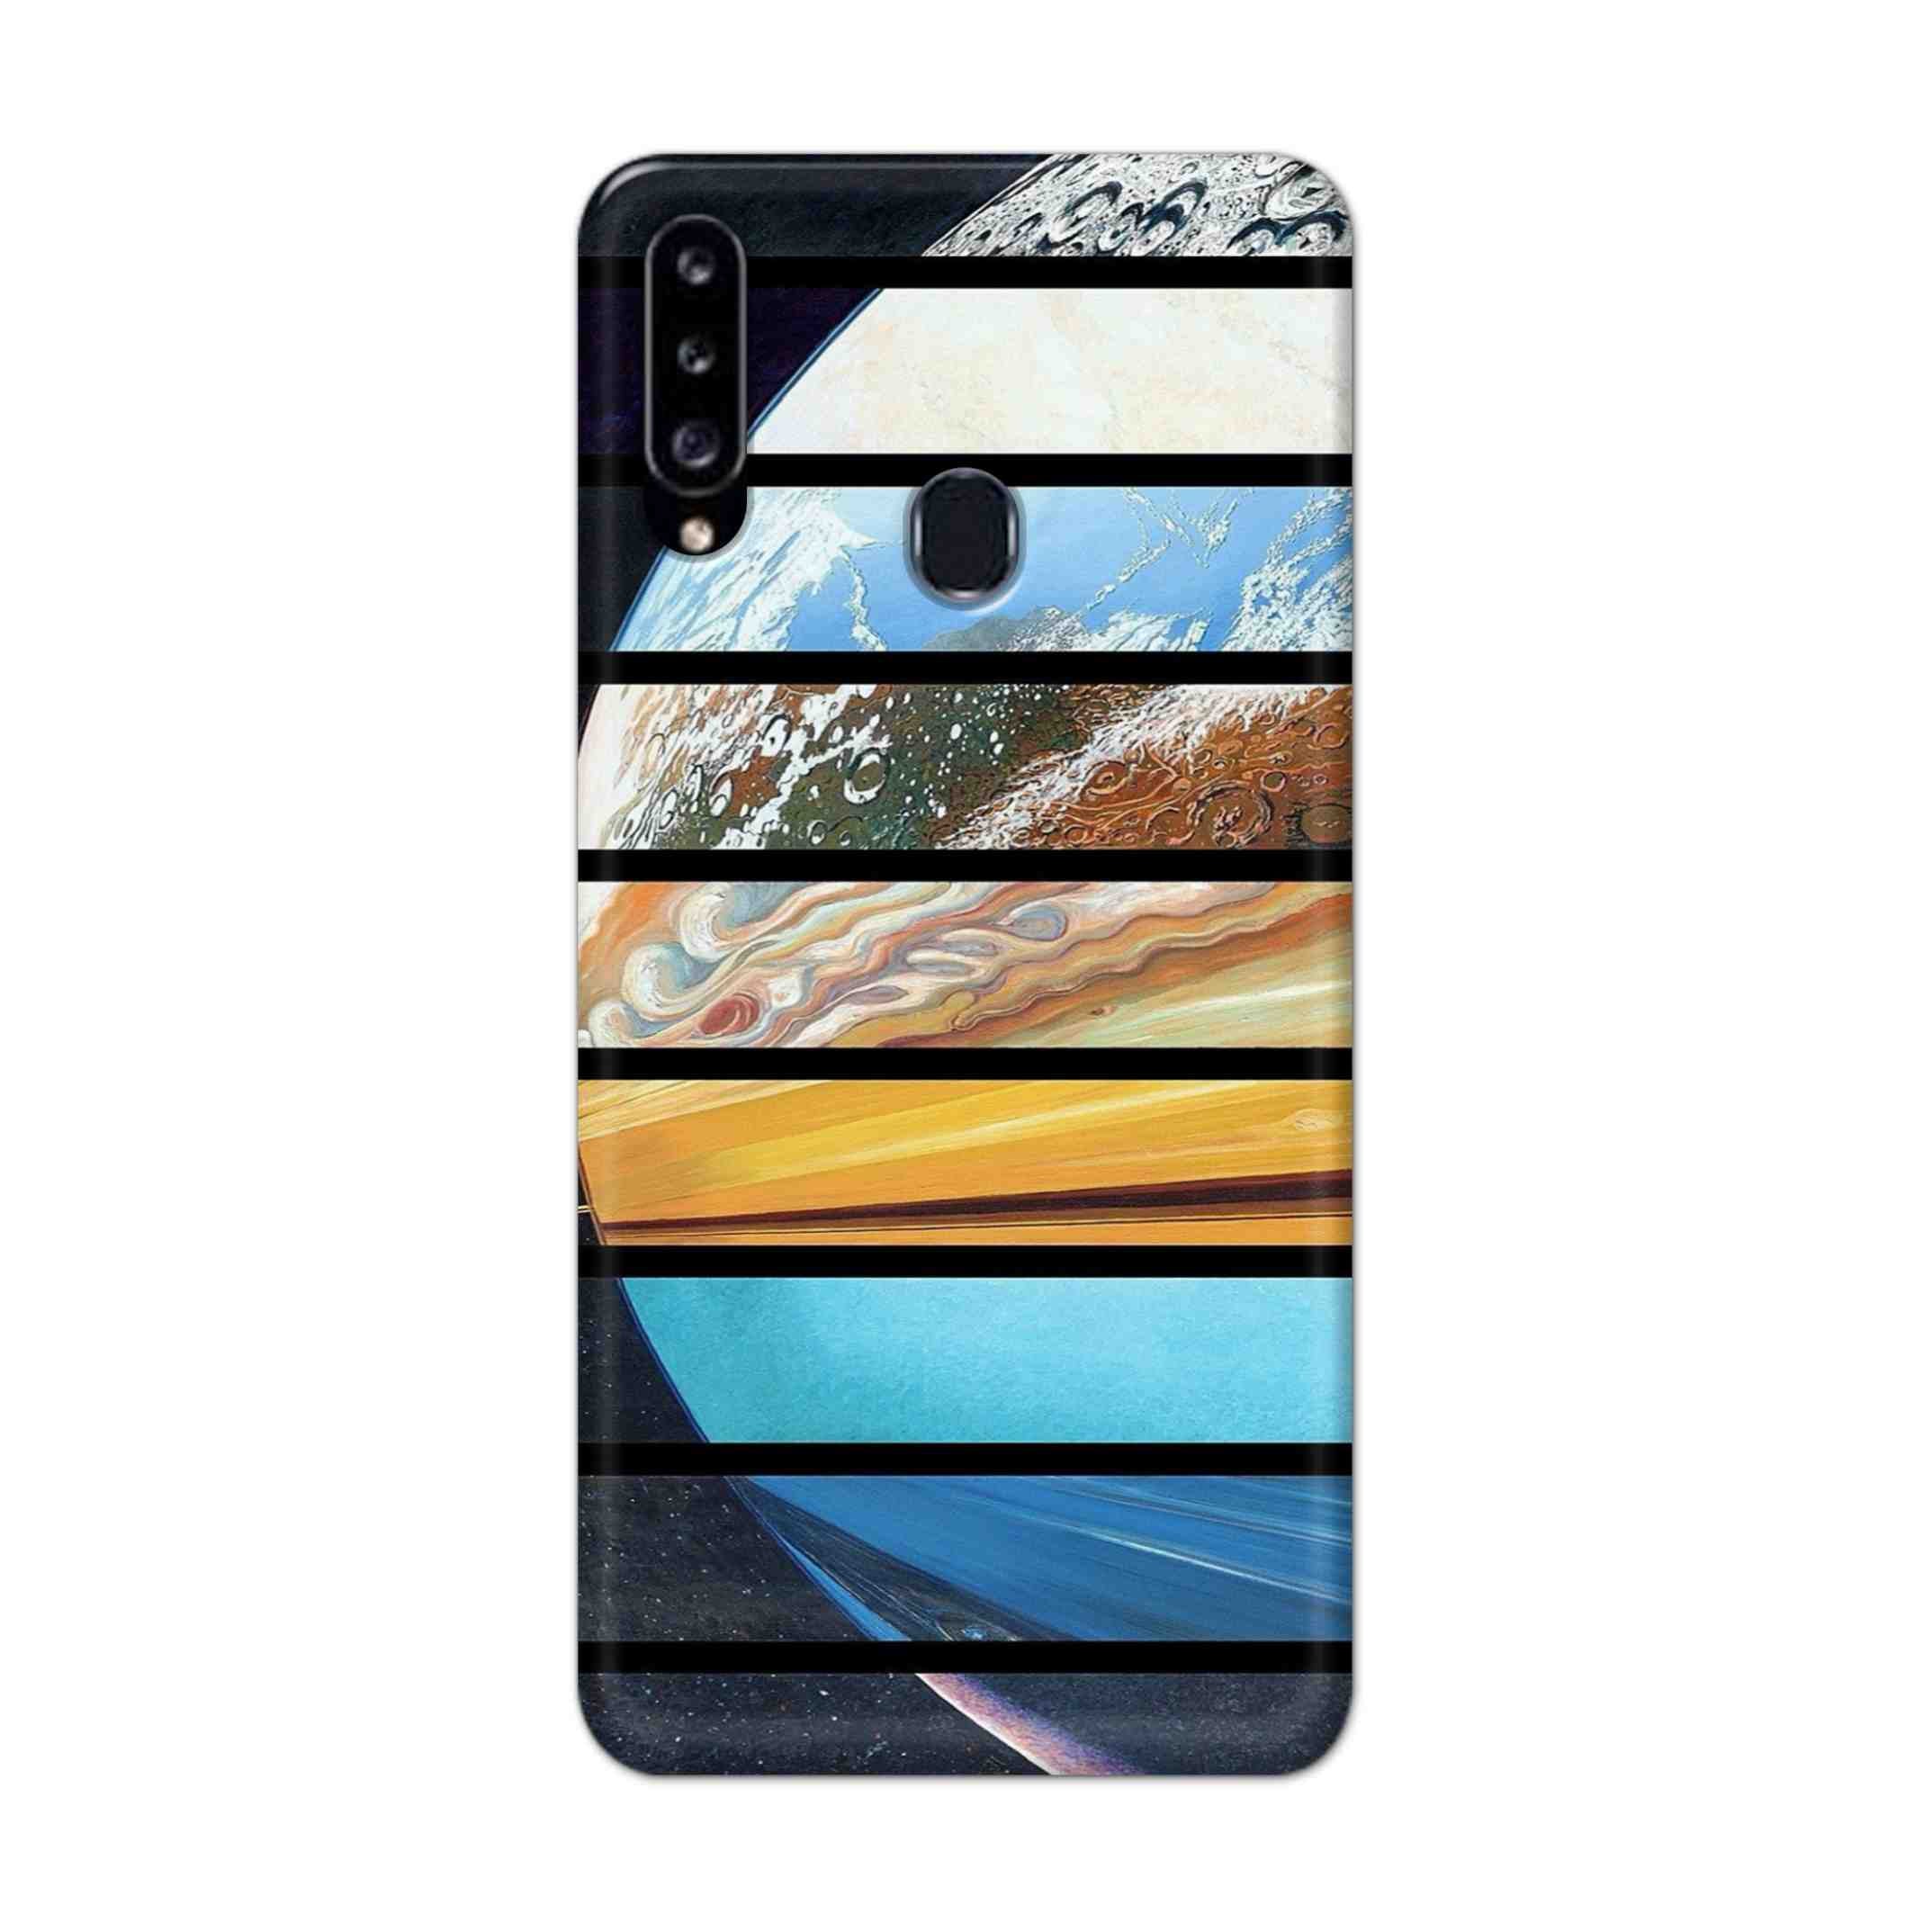 Buy Colourful Earth Hard Back Mobile Phone Case Cover For Samsung Galaxy A21 Online